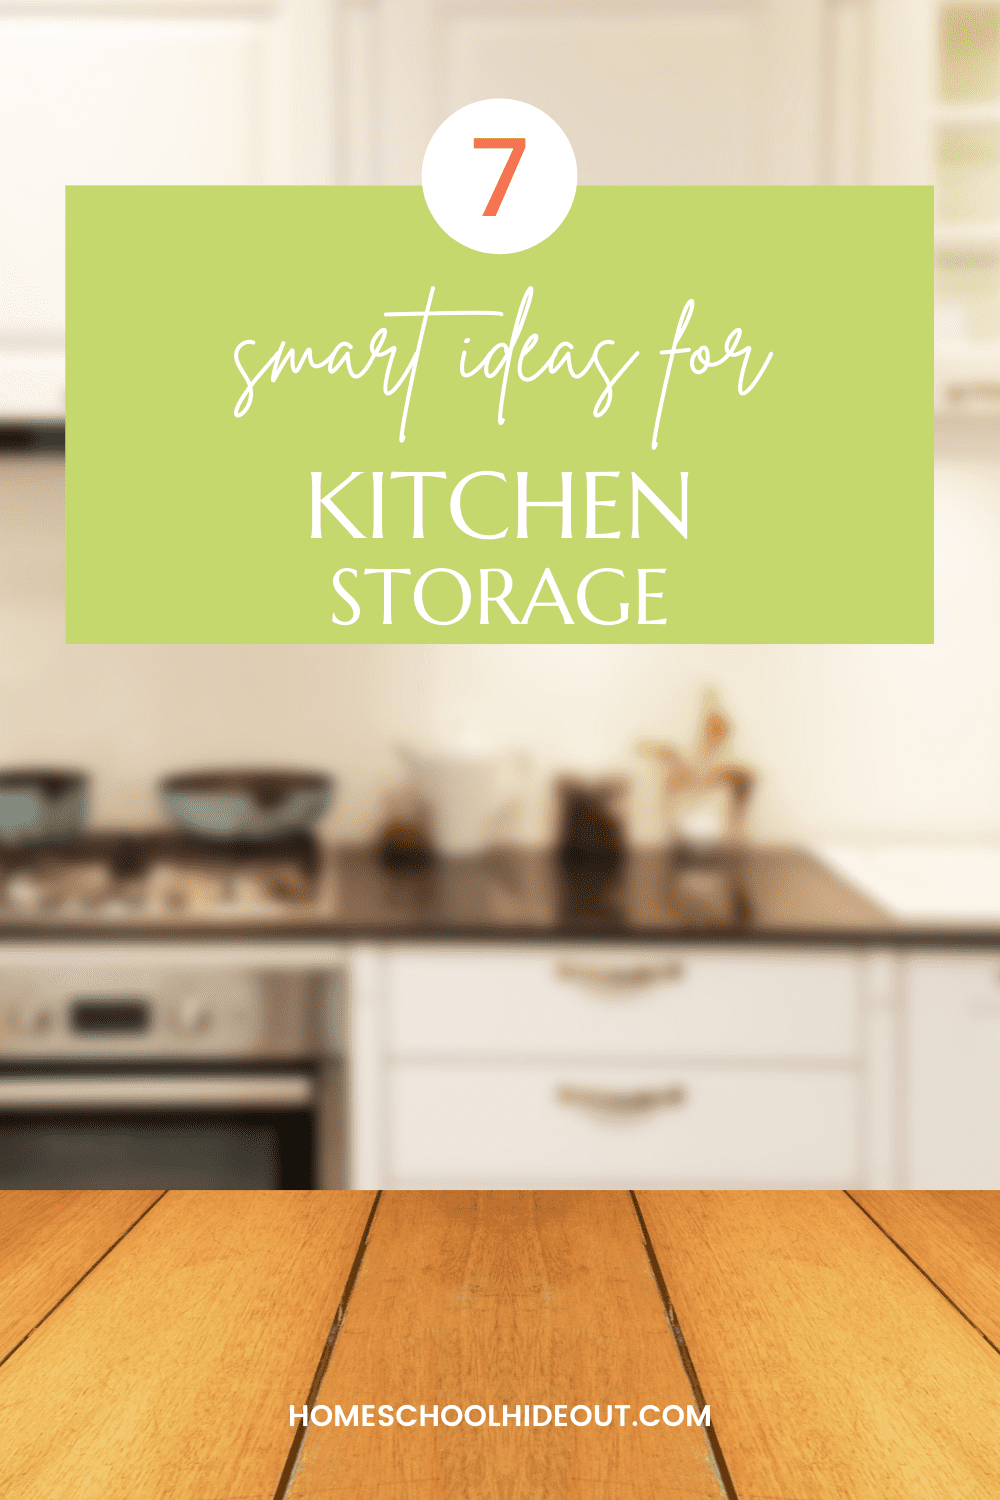 Love these smart storage ideas for the kitchen!